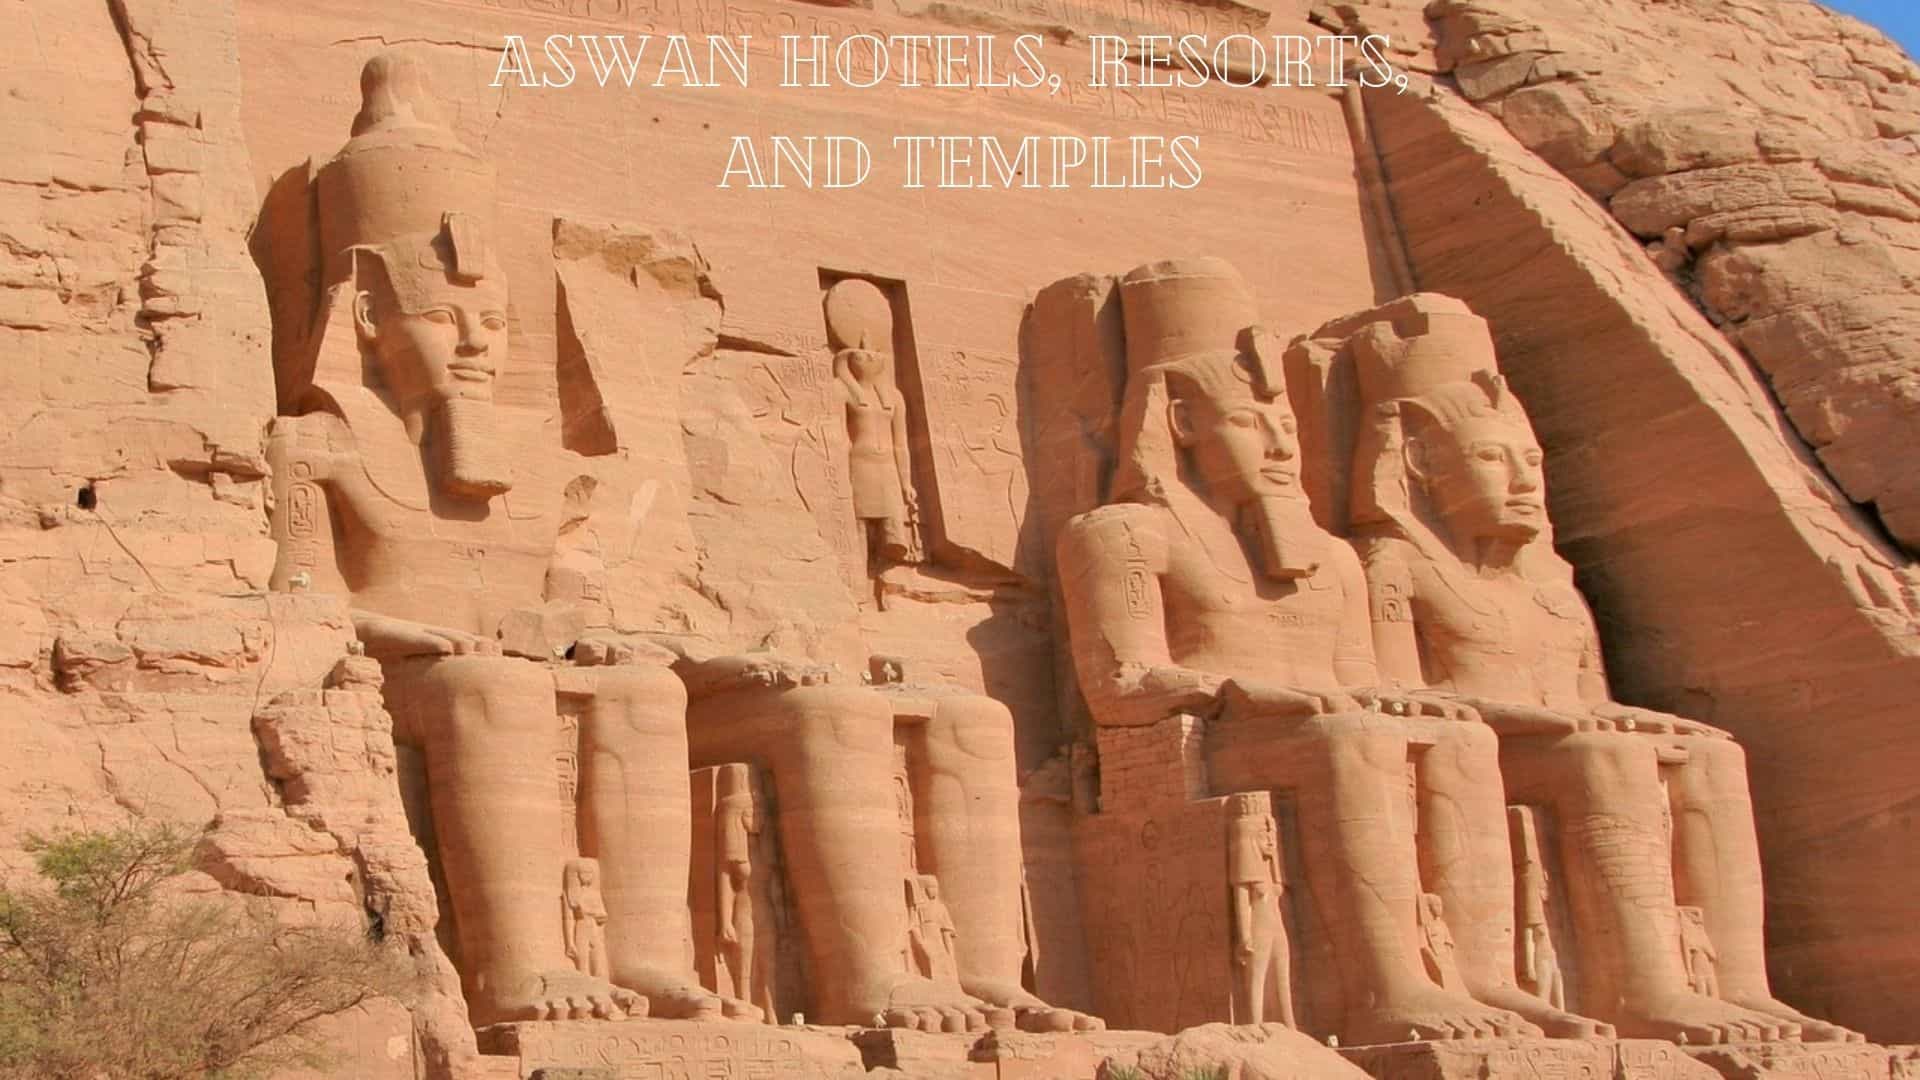 Aswan hotels, resorts, and temples